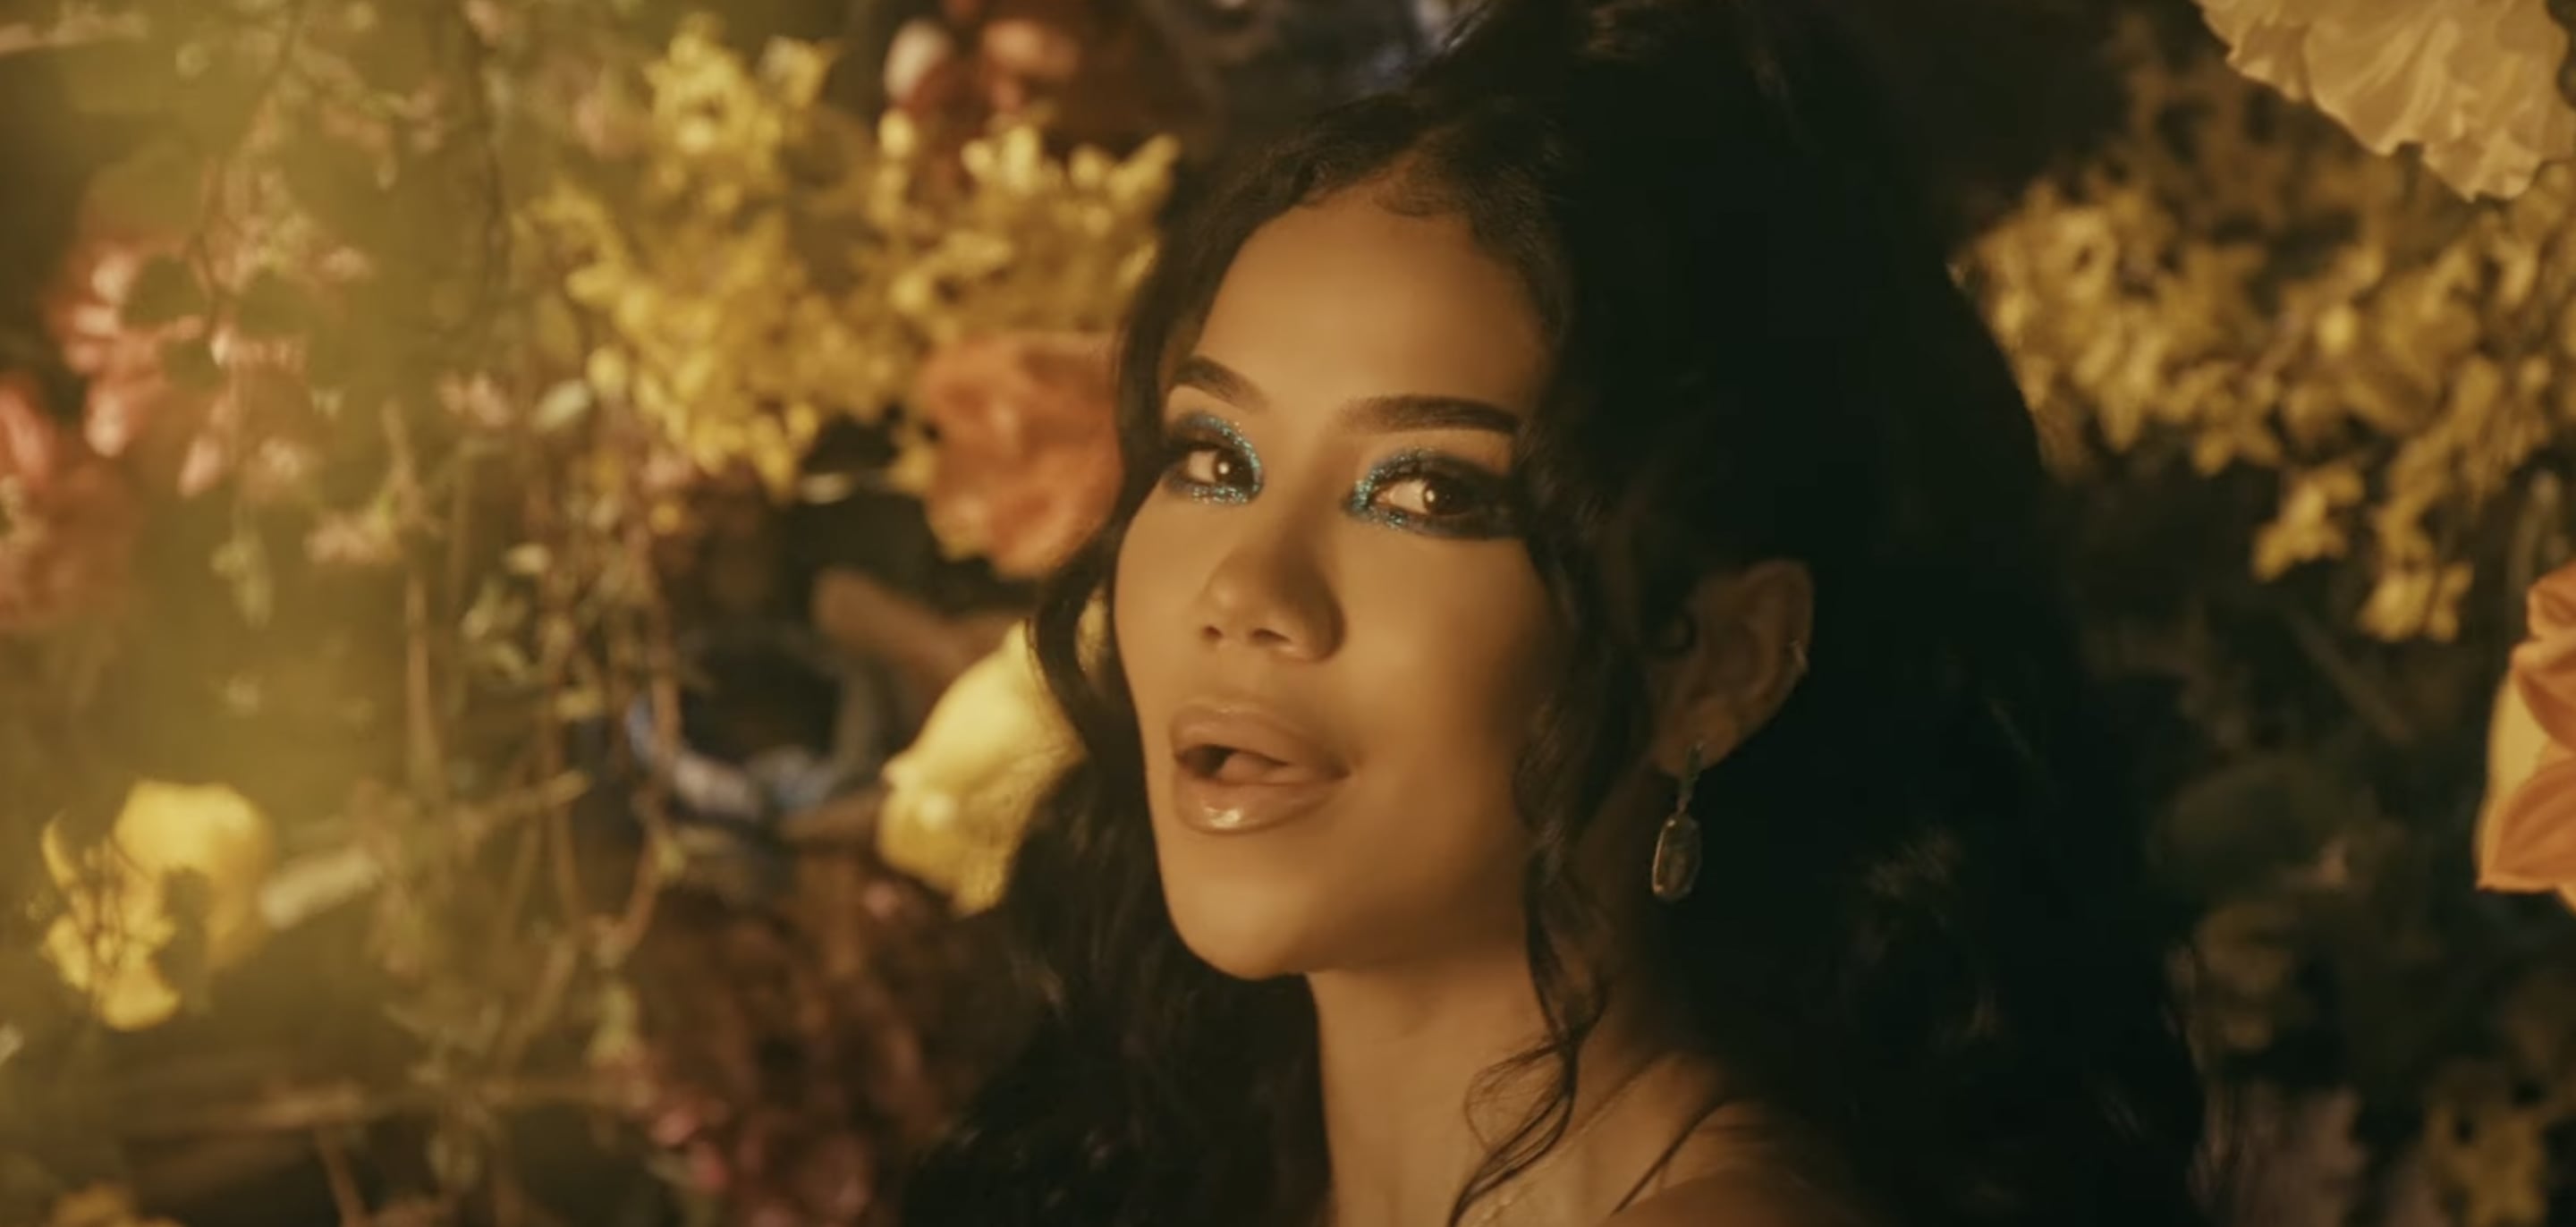 Jhené Aiko and August 08 Release Water Sign Video | POPSUGAR Entertainment